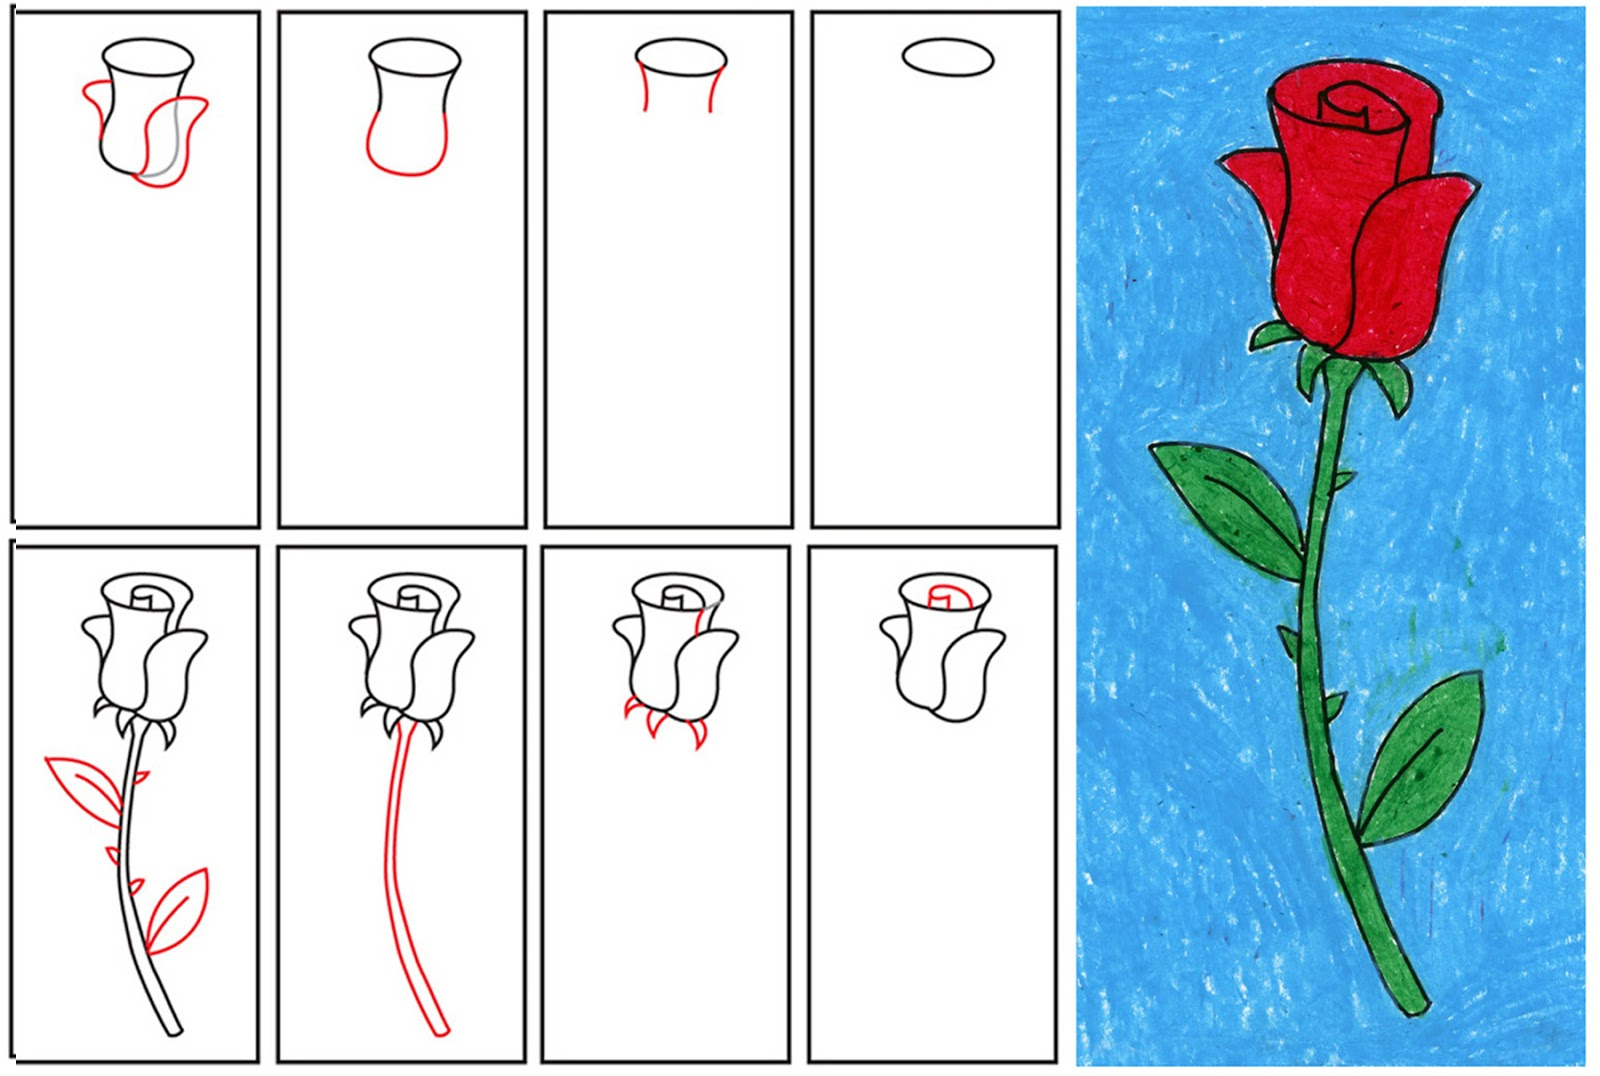 Great How To Draw Flowers For Kids Step By Step in the world The ultimate guide 